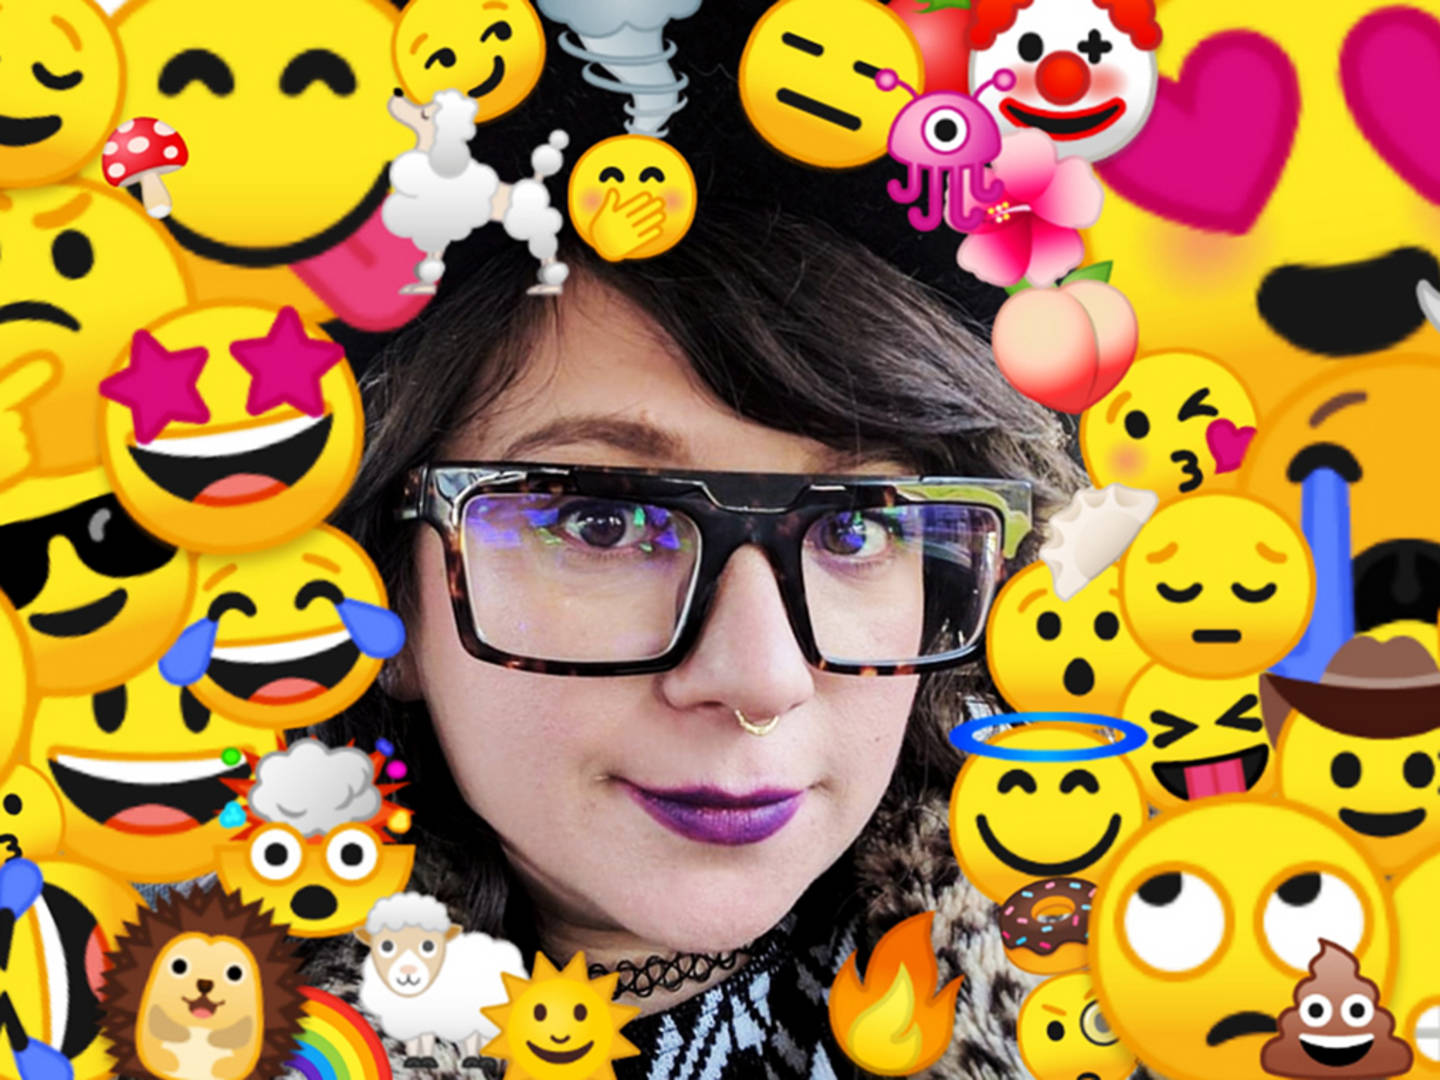 Jennifer Daniel, the woman who will decide what emoji we get to use